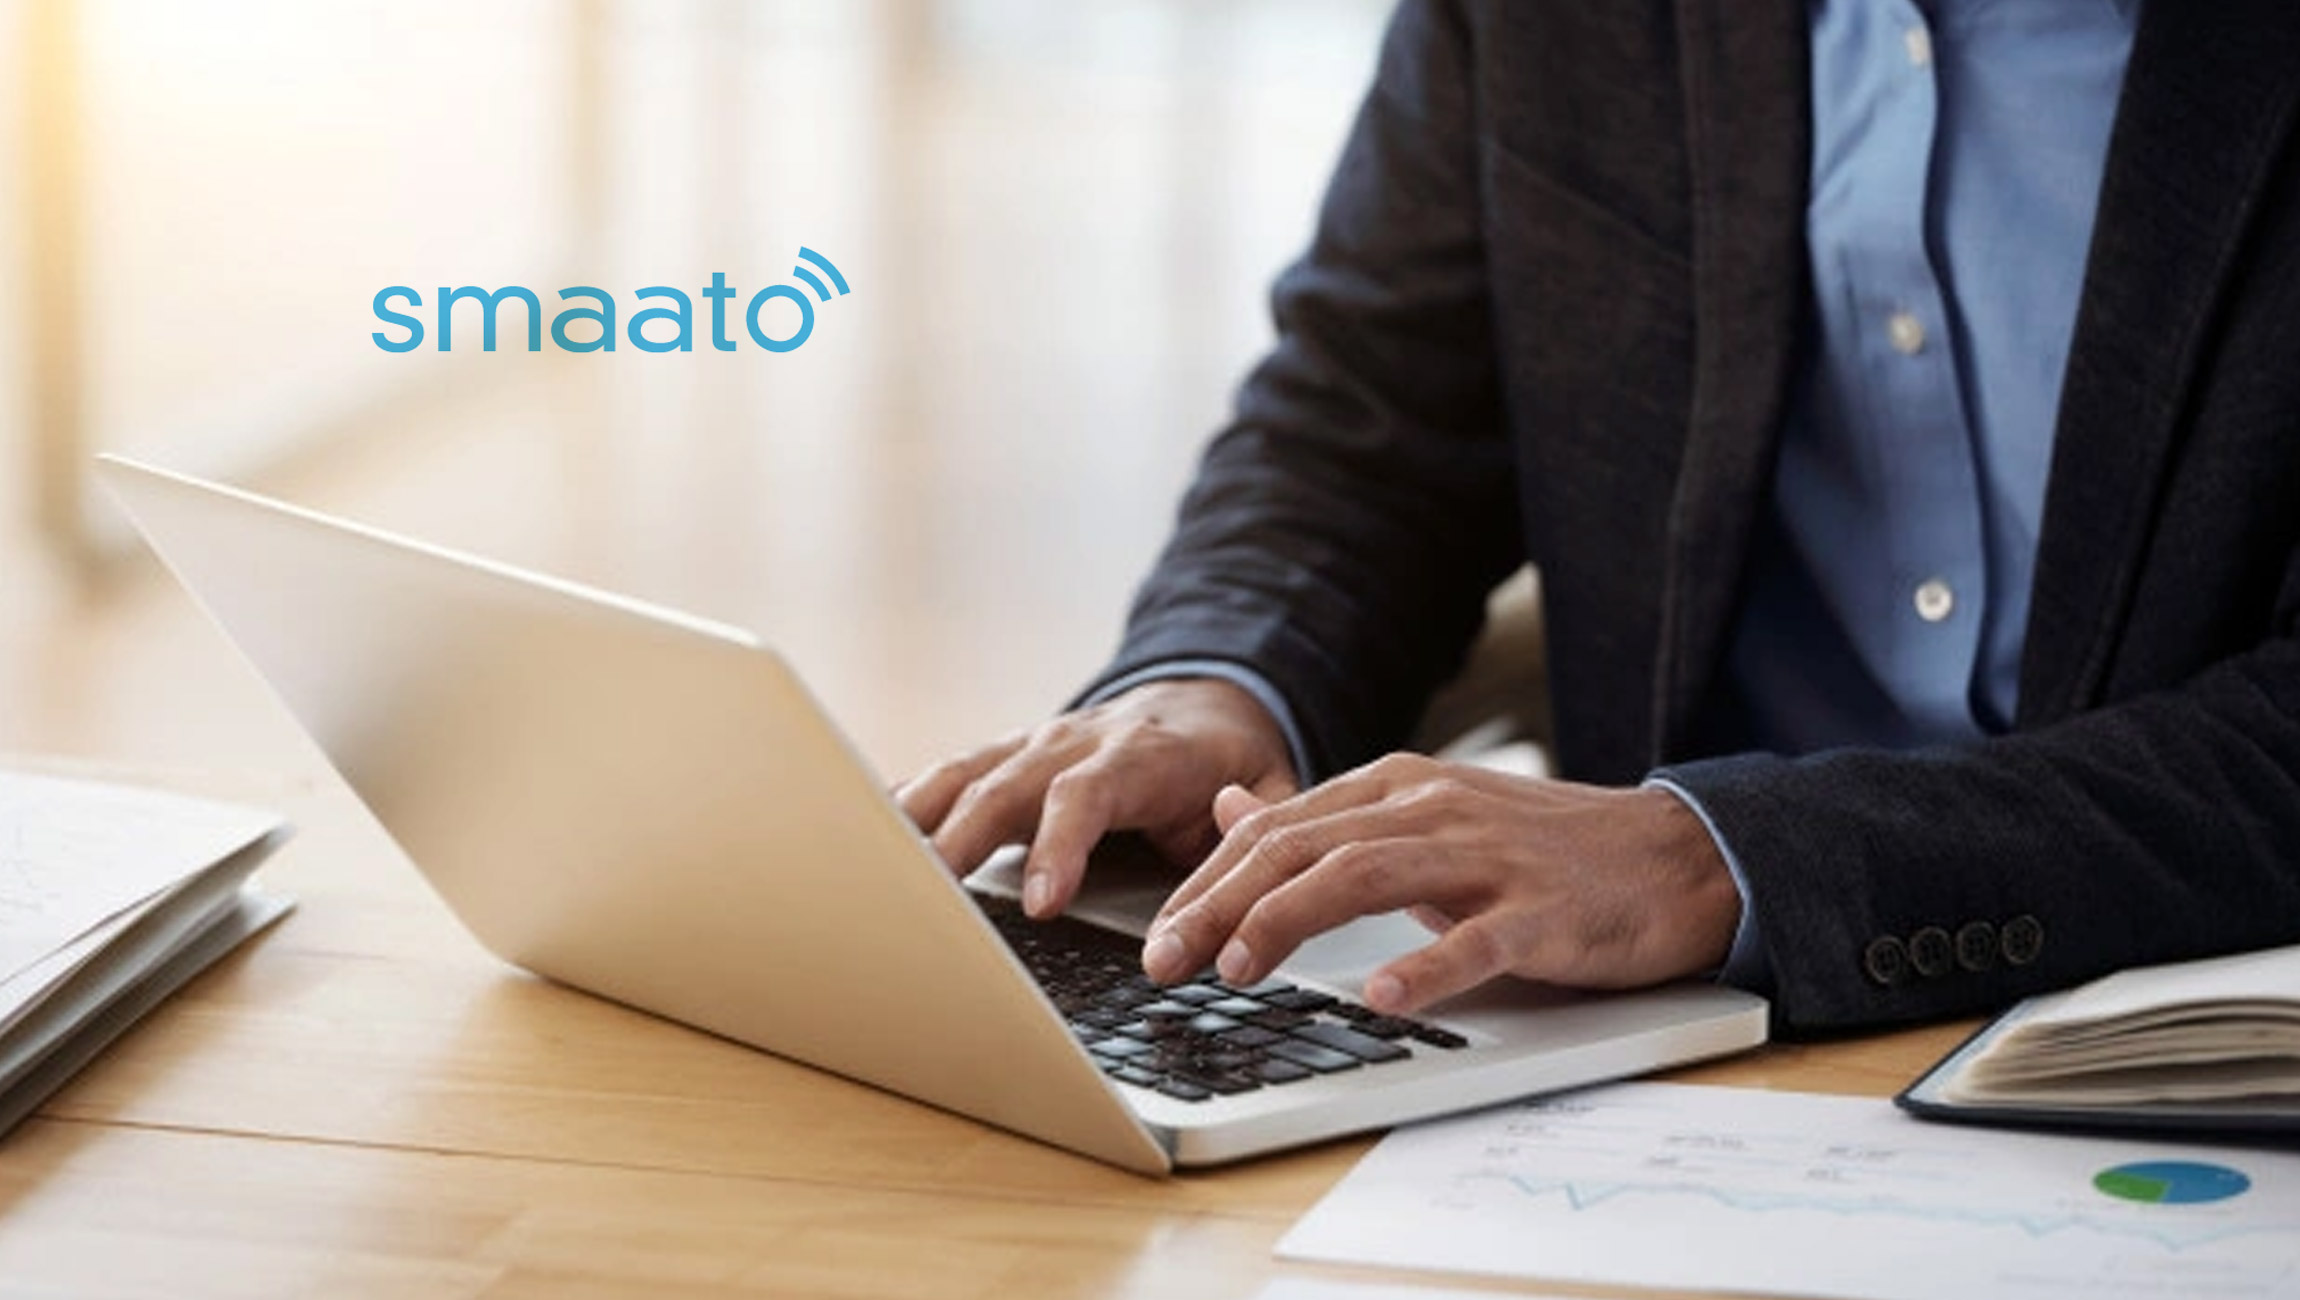 Smaato's Digital Ad Tech Platform is a Data-Privacy Compliant, Self-Serve Ad Server and Monetization Solution That Gives Publishers Controls to Build Their Own Walled Gardens